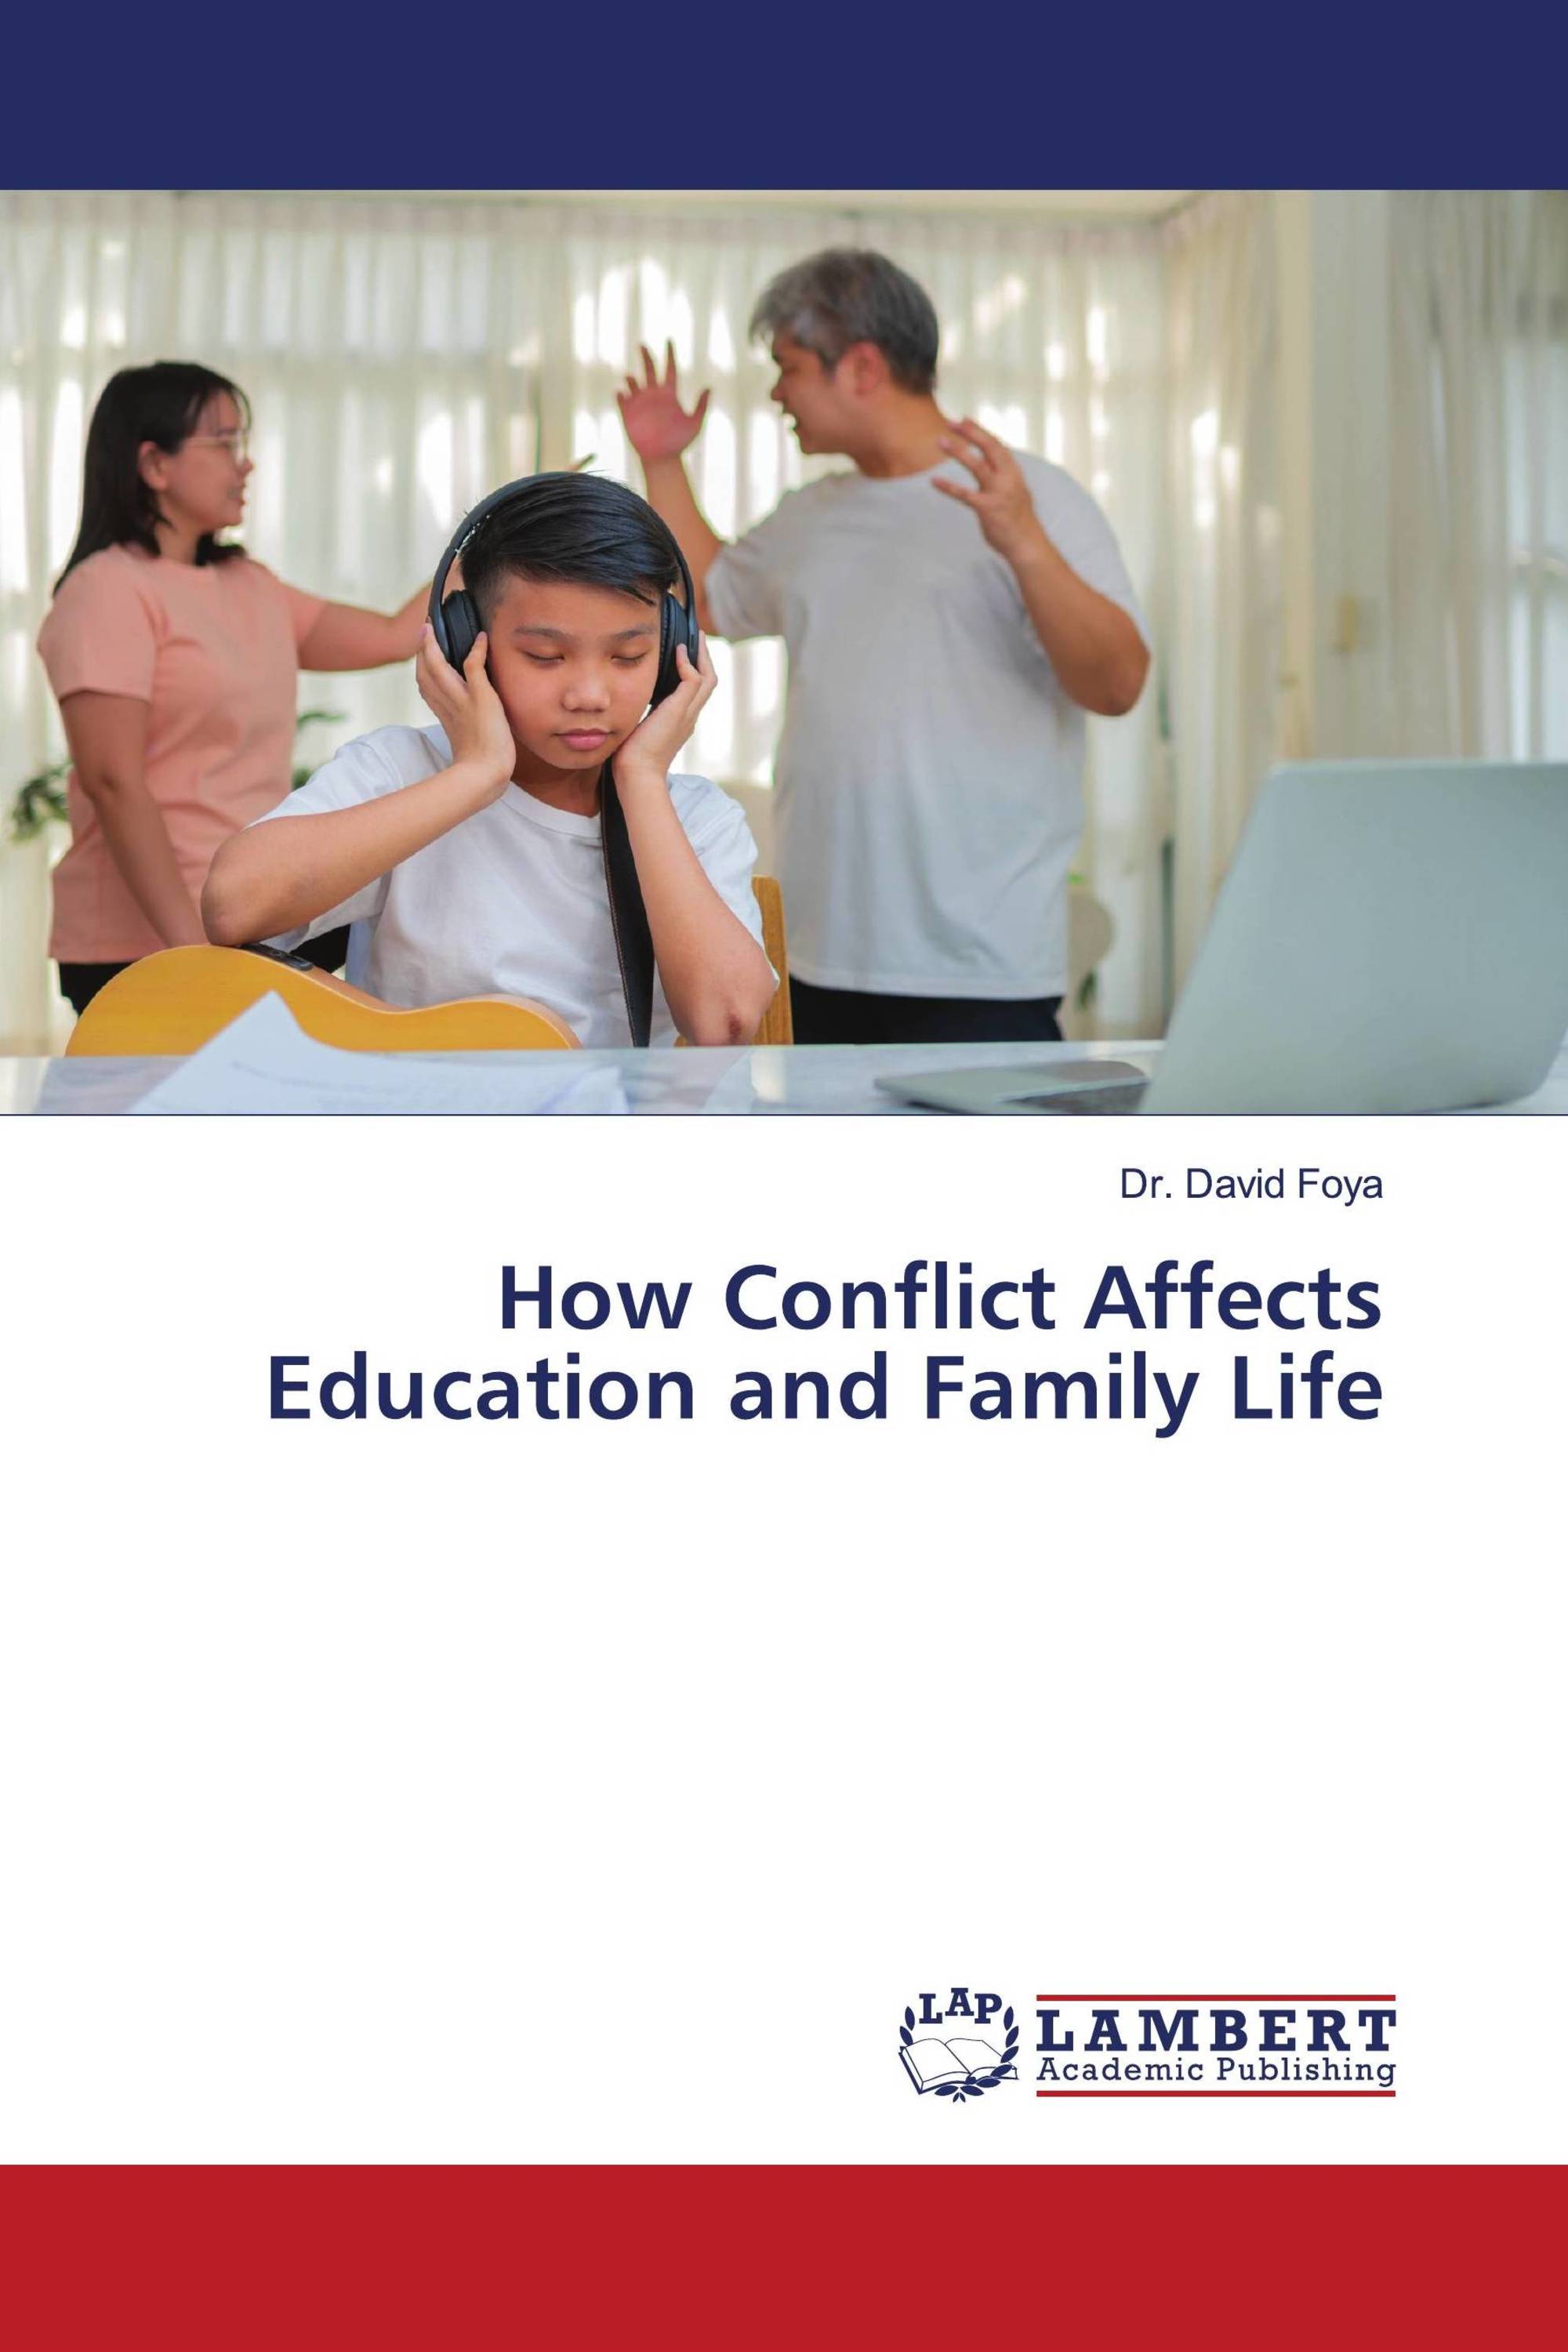 How Conflict Affects Education and Family Life